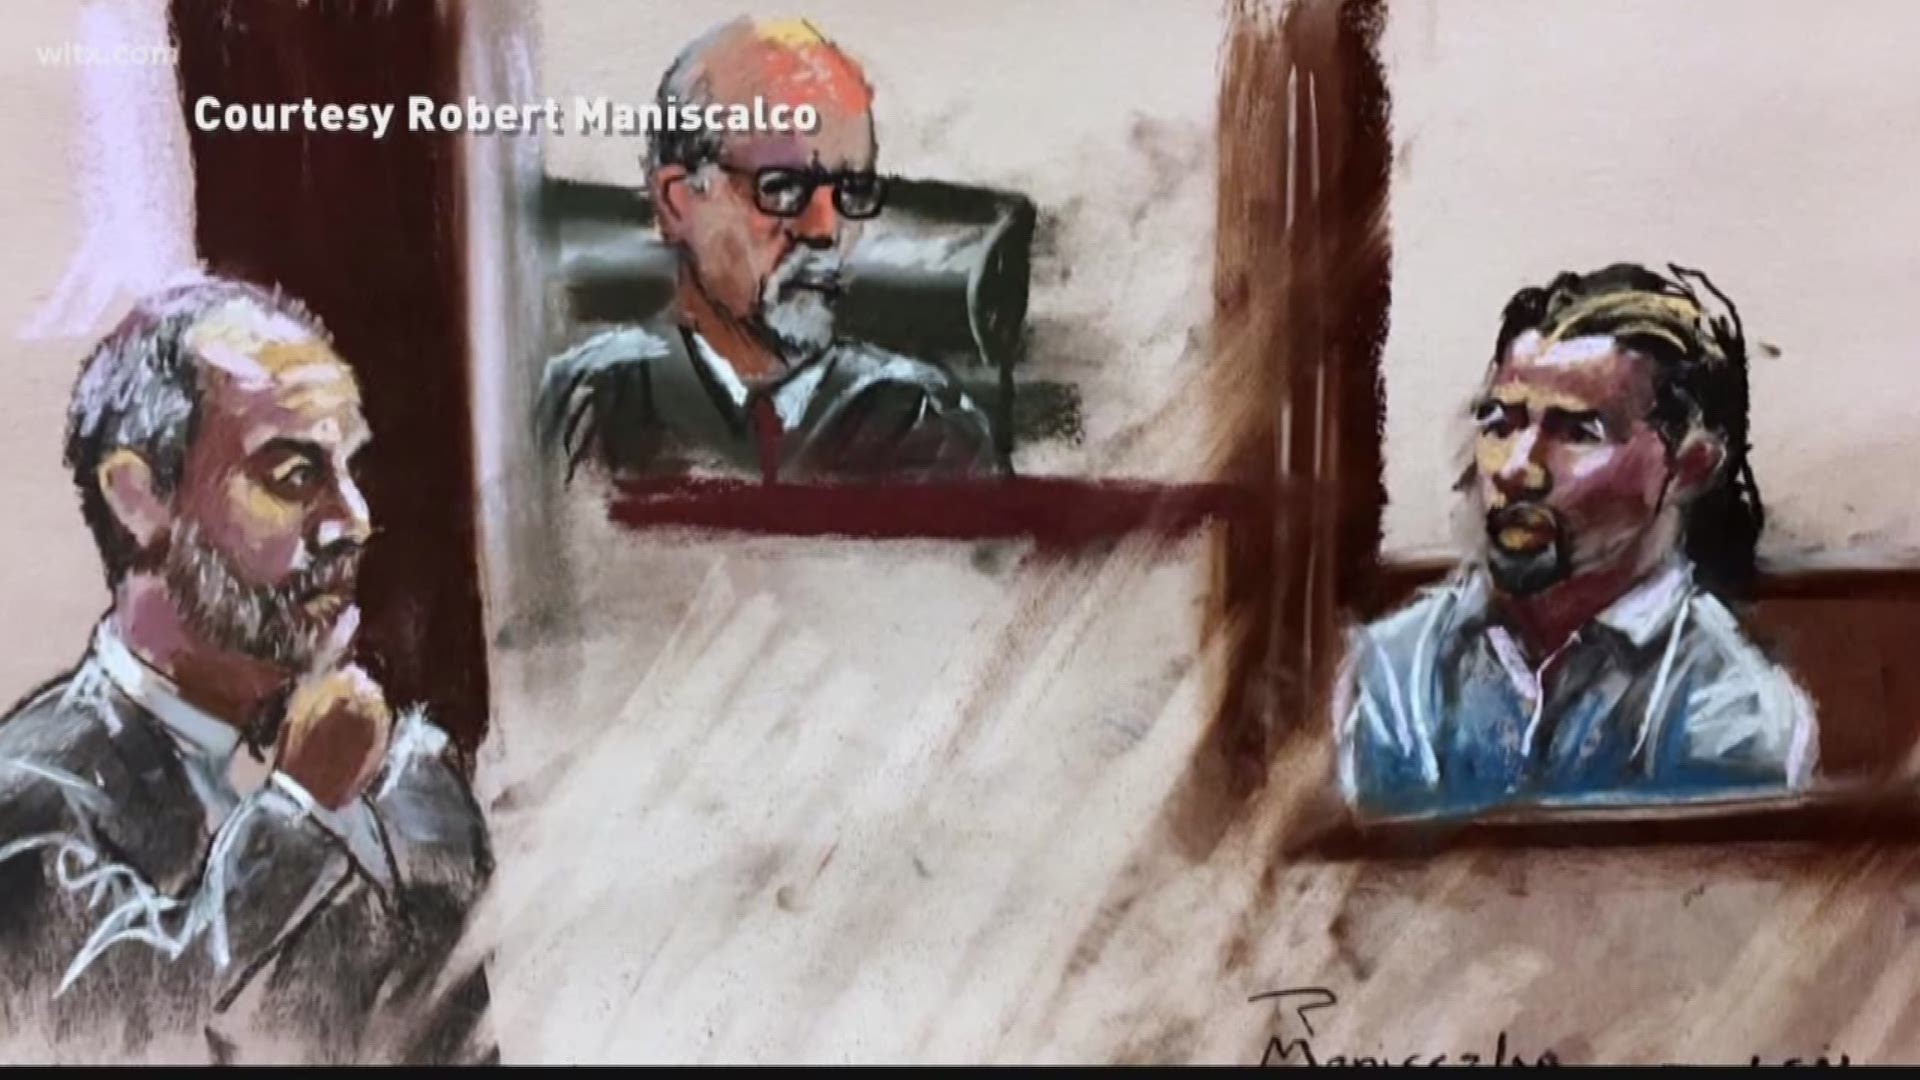 The sketch artist speaks out about what he saw while covering the Michael Slager sentencing hearing.